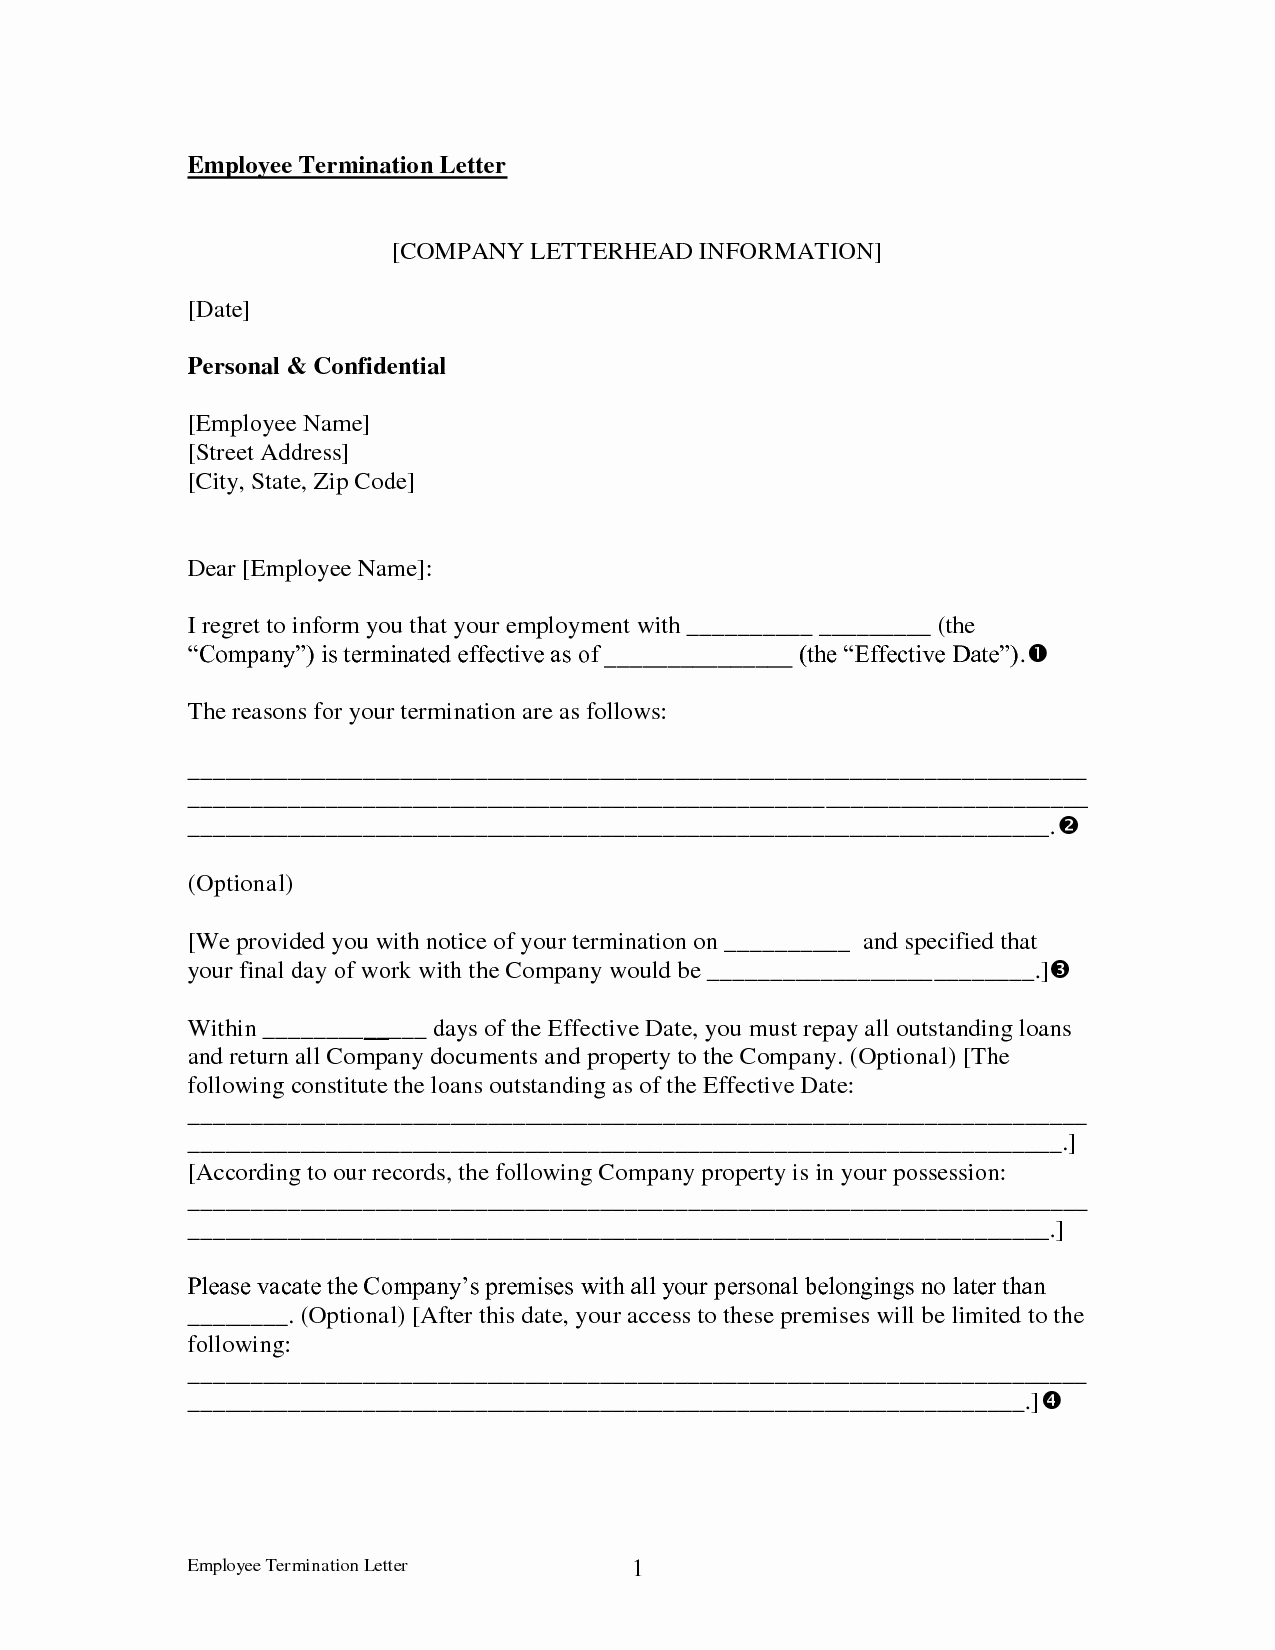 Free Employment Termination forms Awesome Termination Letter